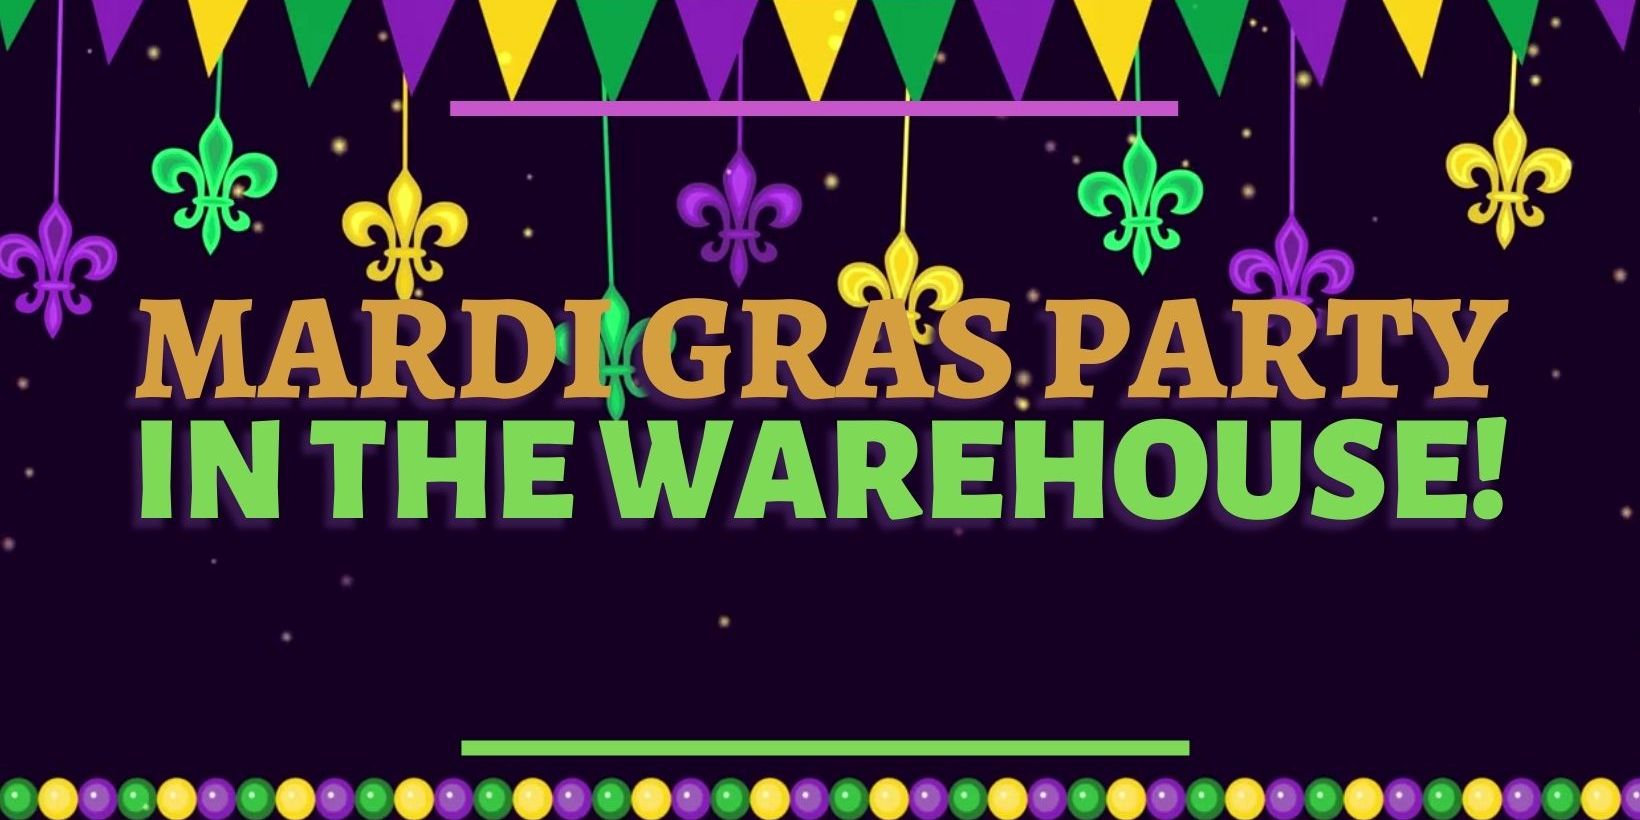 Mardi Gras Party In the Warehouse! promotional image